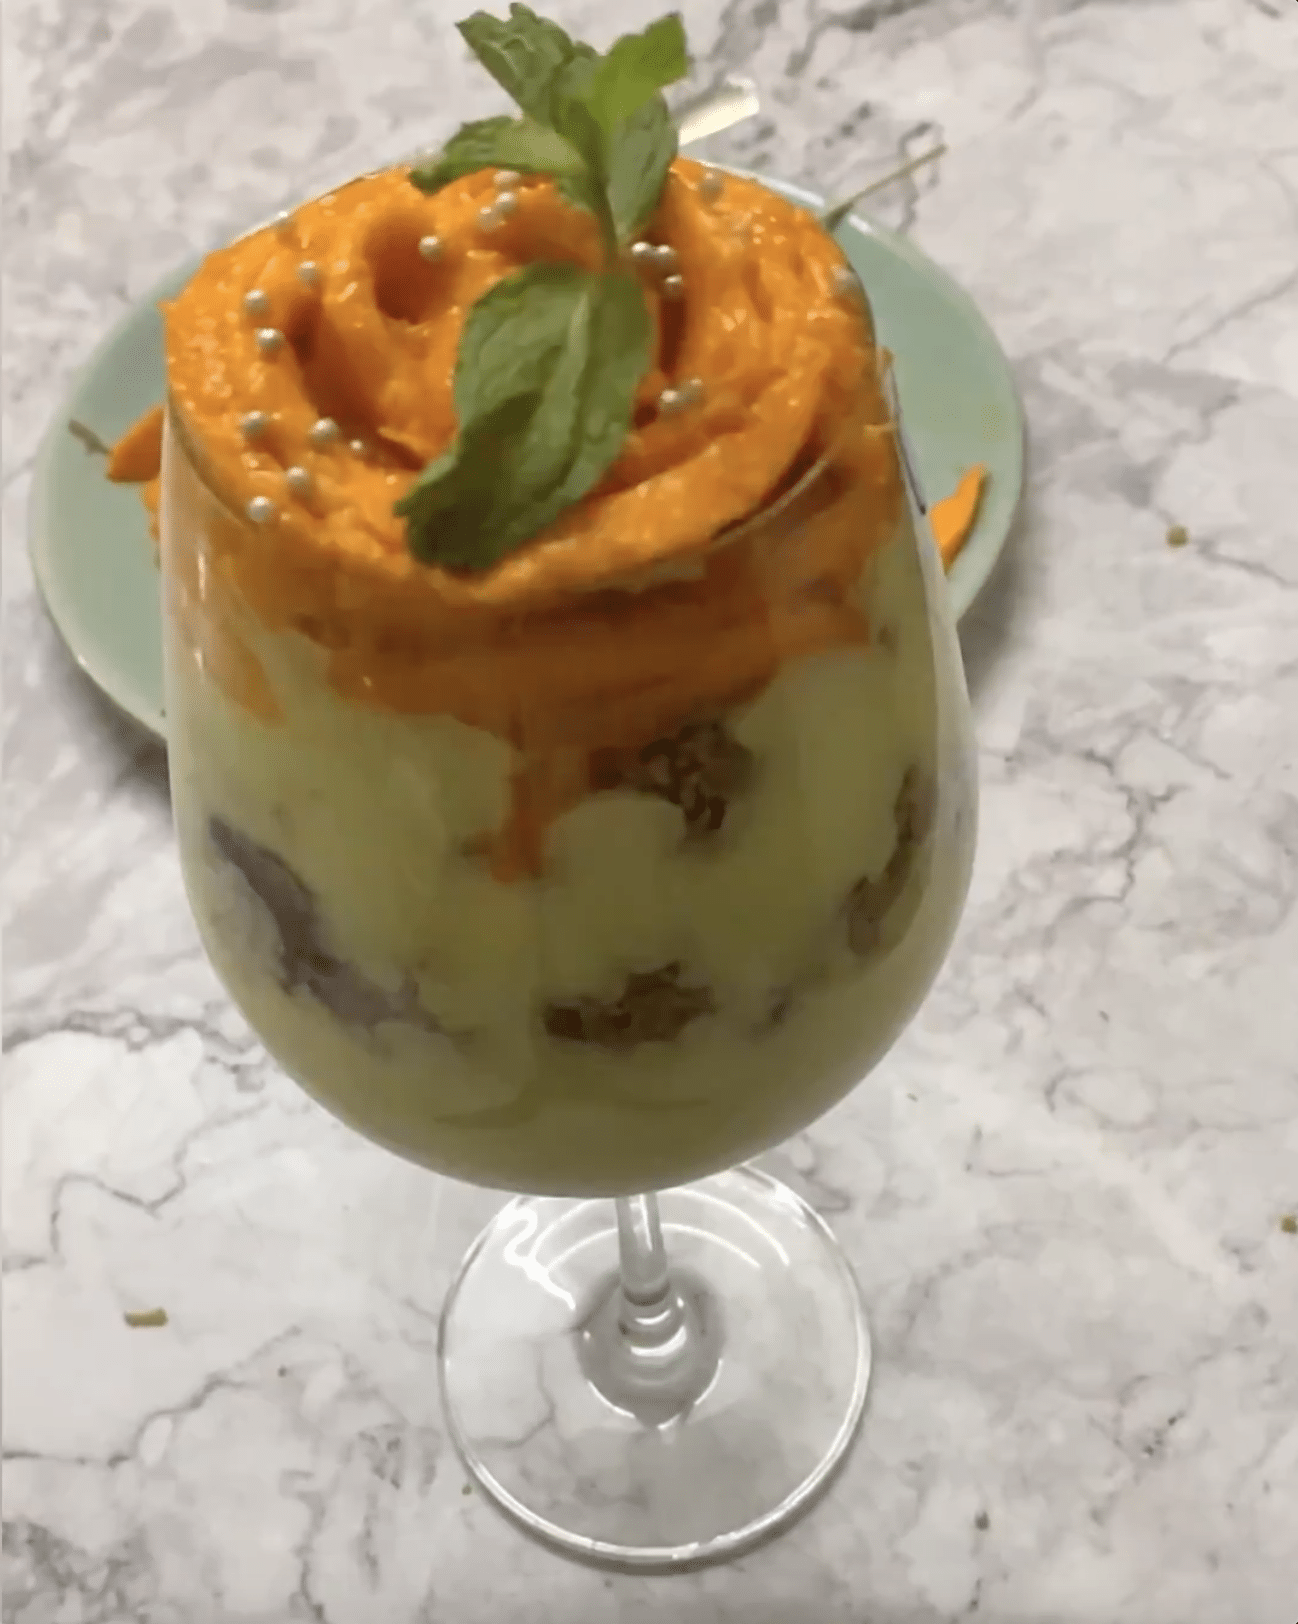 A mango trifle in a glass as part of our Summer Dessert Recipes roundup.